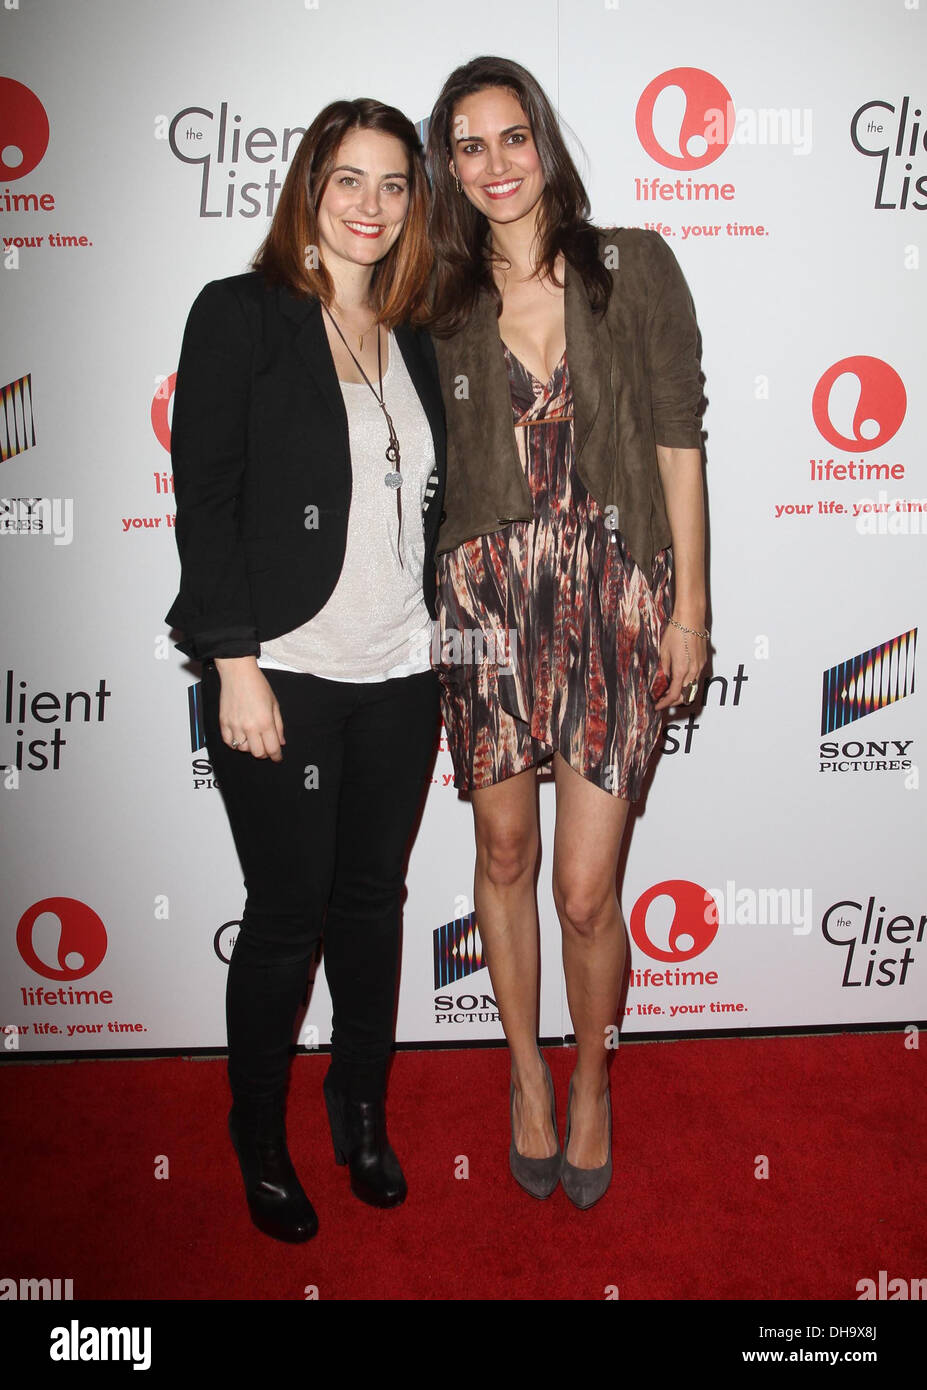 Clementine Ford Tracy Ryerson Lifetime And Sony Pictures Television Red Carpet Launch Party For 'The Client List' Held At Stock Photo